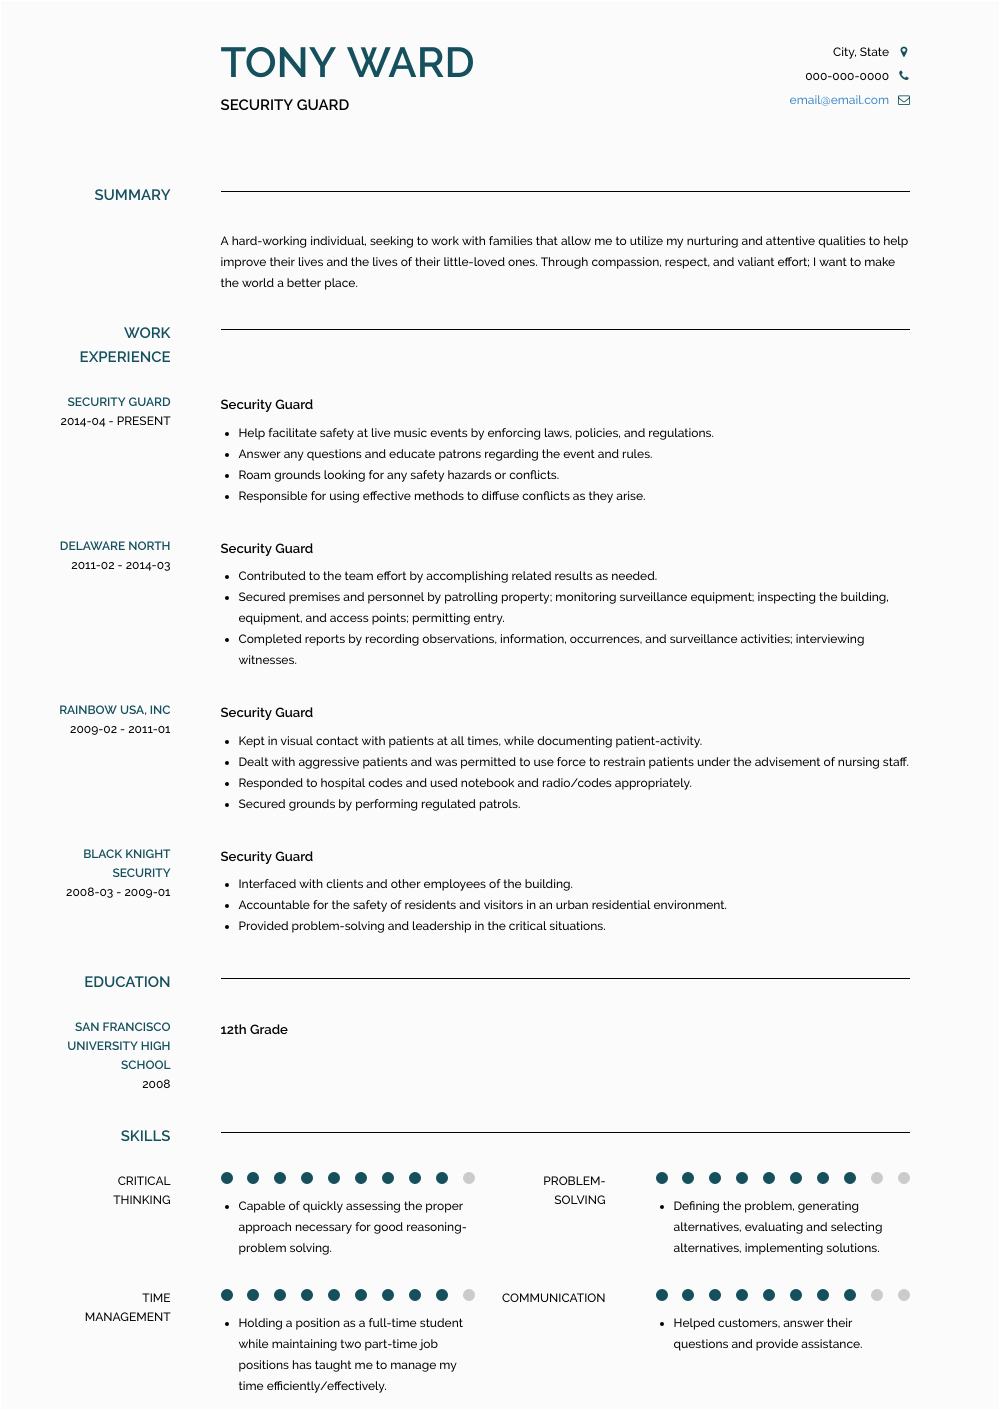 Free Sample Resume for Security Guard Security Guard Resume Samples and Templates